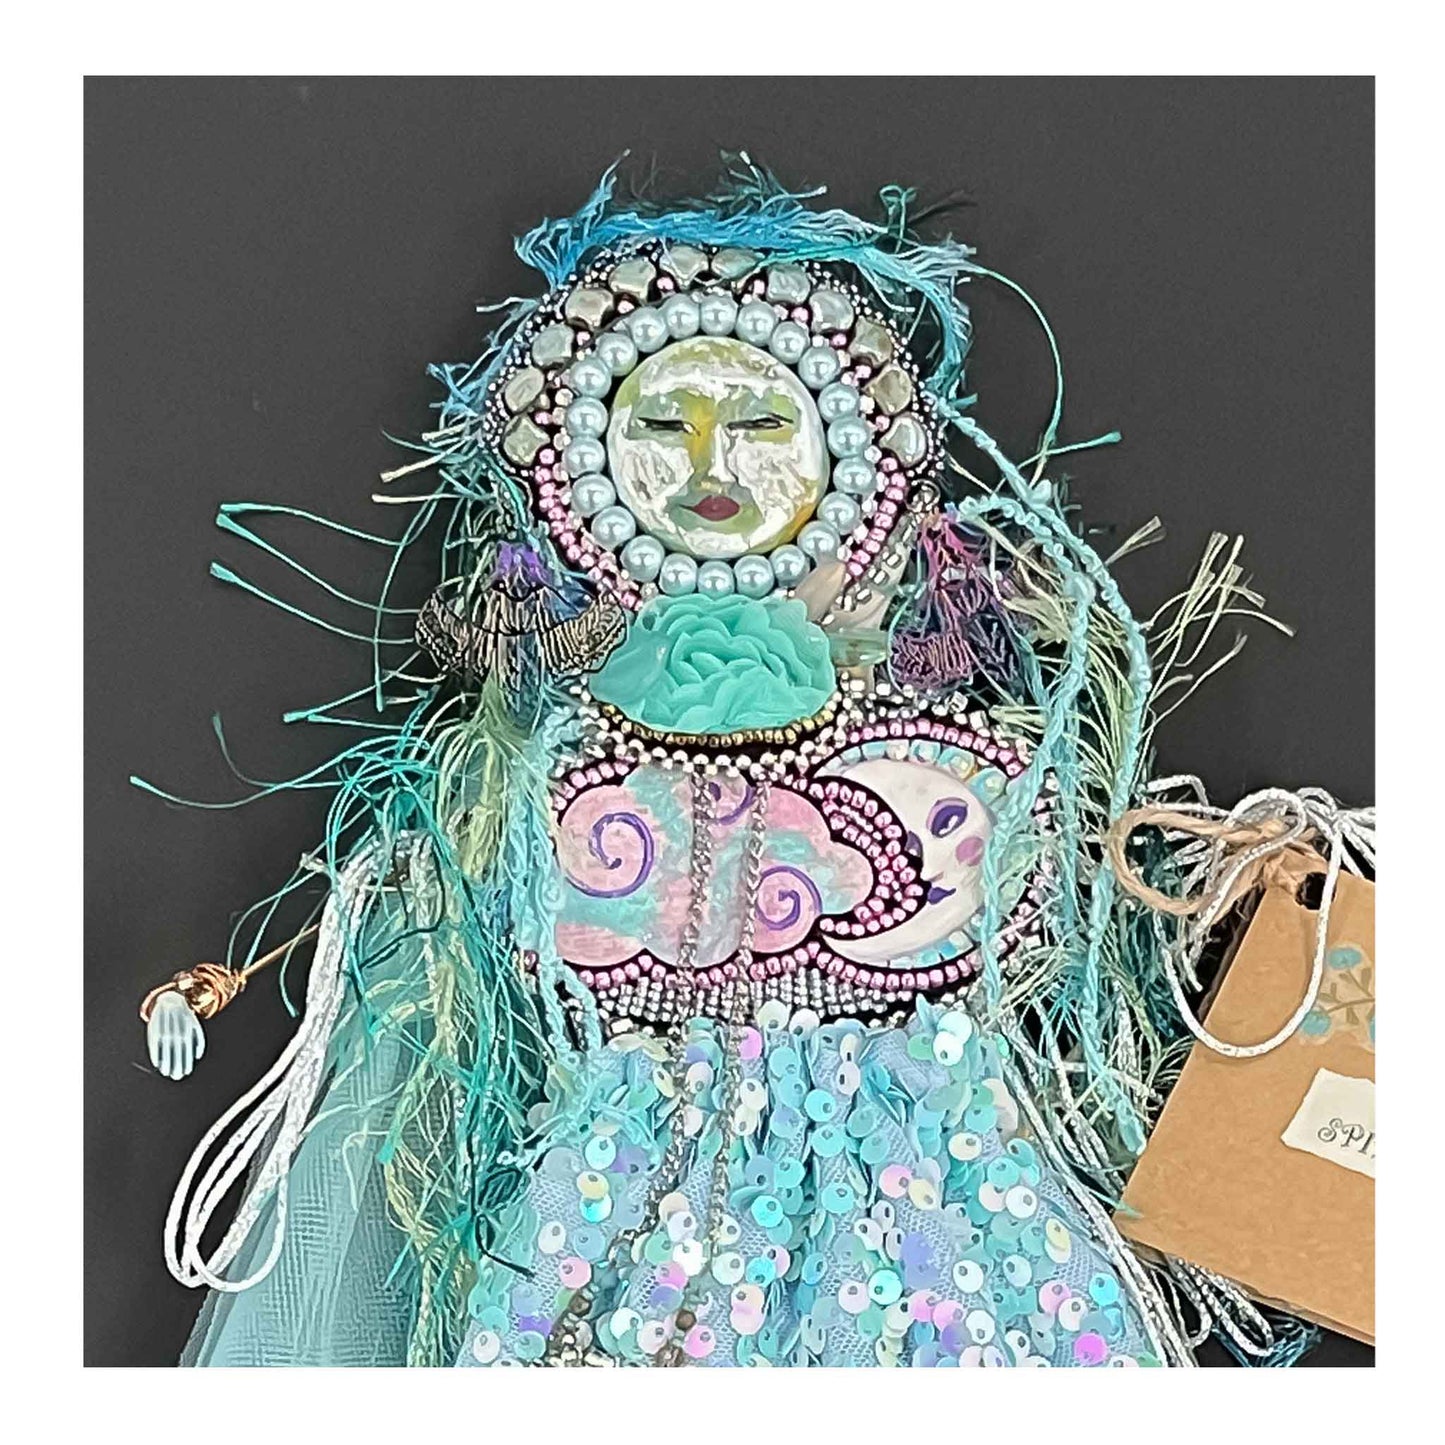 Spirit of Dreams, Doll, Wall Hanging, aqua sequins, netting, bead embroidery, wood, cloud, moon, ceramic hands and feet, polymer clay face, pearls, wire, fringe, yarn ,fabric, 16 X 7